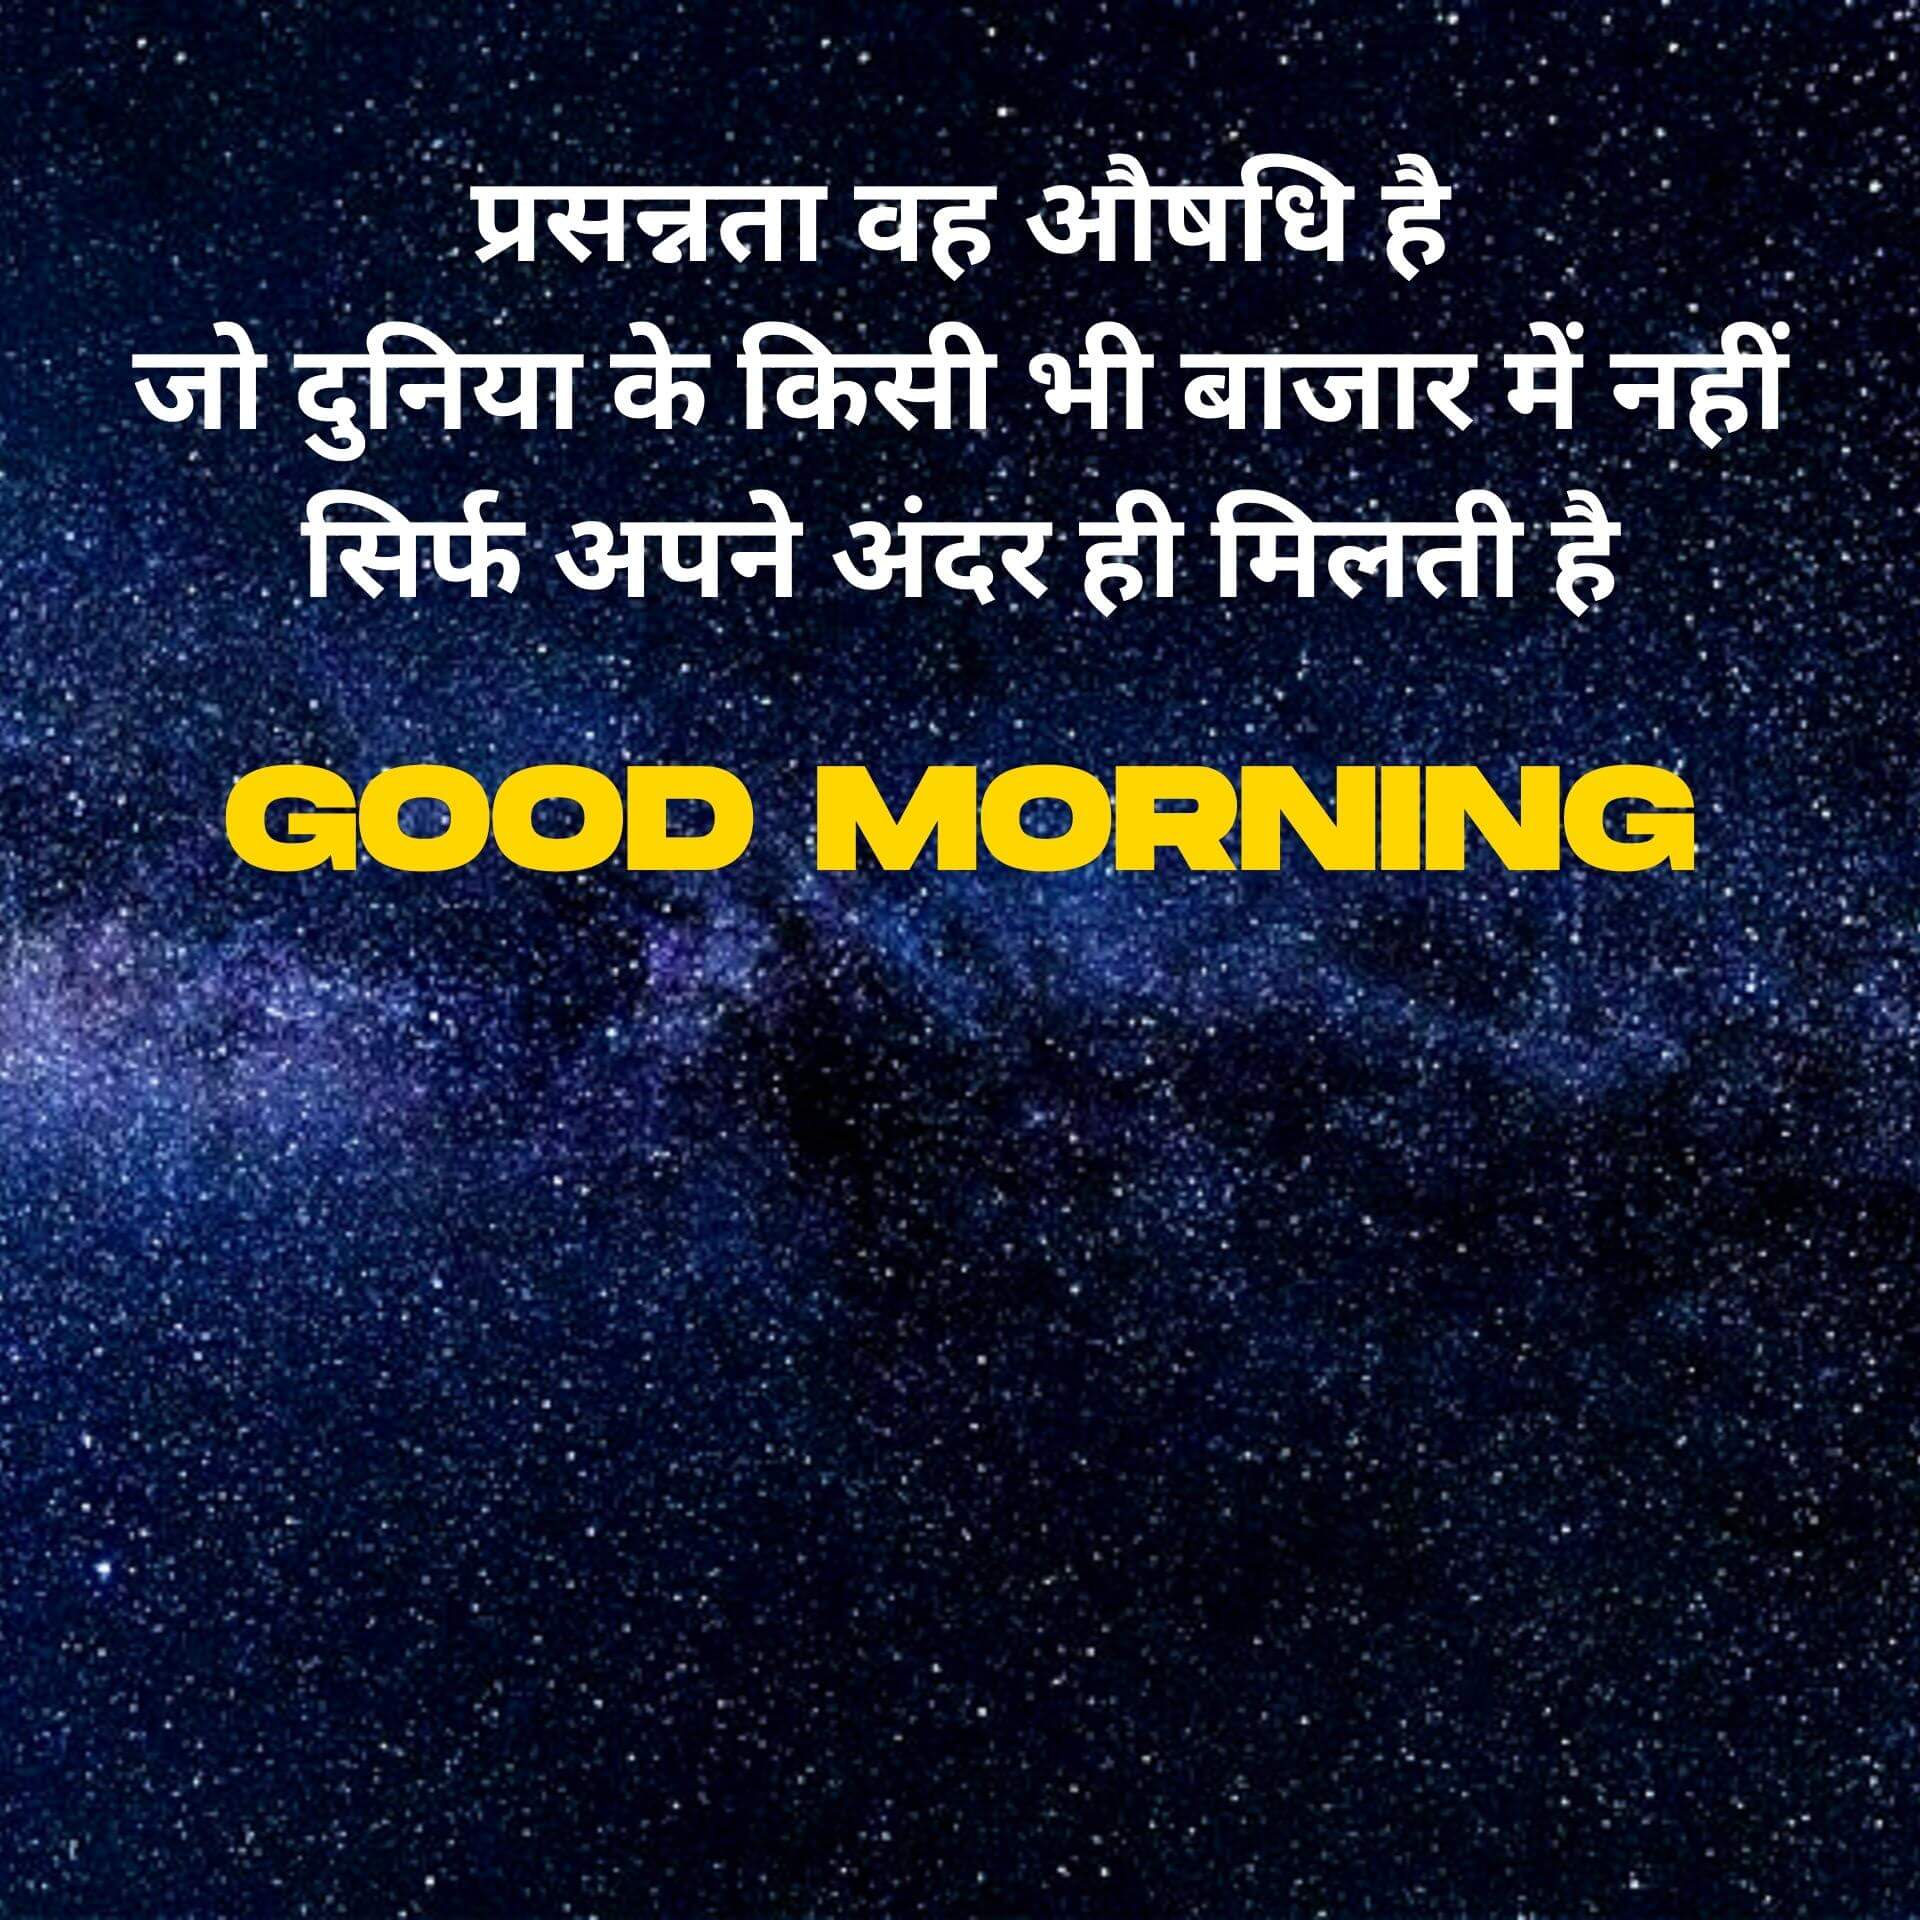 Good Morning Image In Hindi – 300+ Morning Quotes Pictures Photo Download